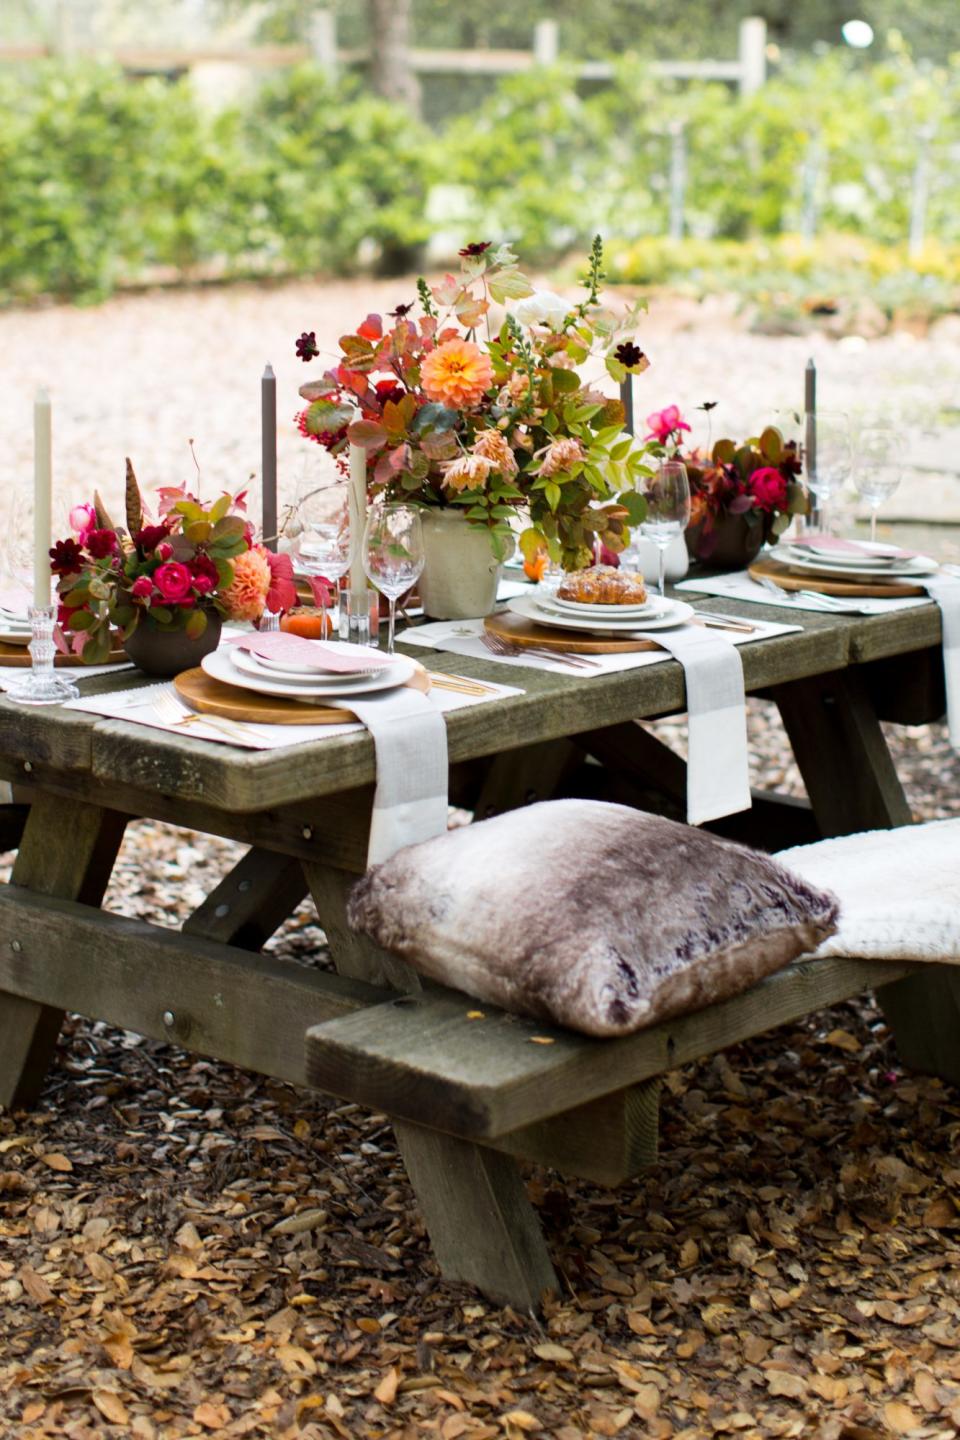 22 Seasonal Ideas You'll Want to Copy for Your Fall Bridal Shower